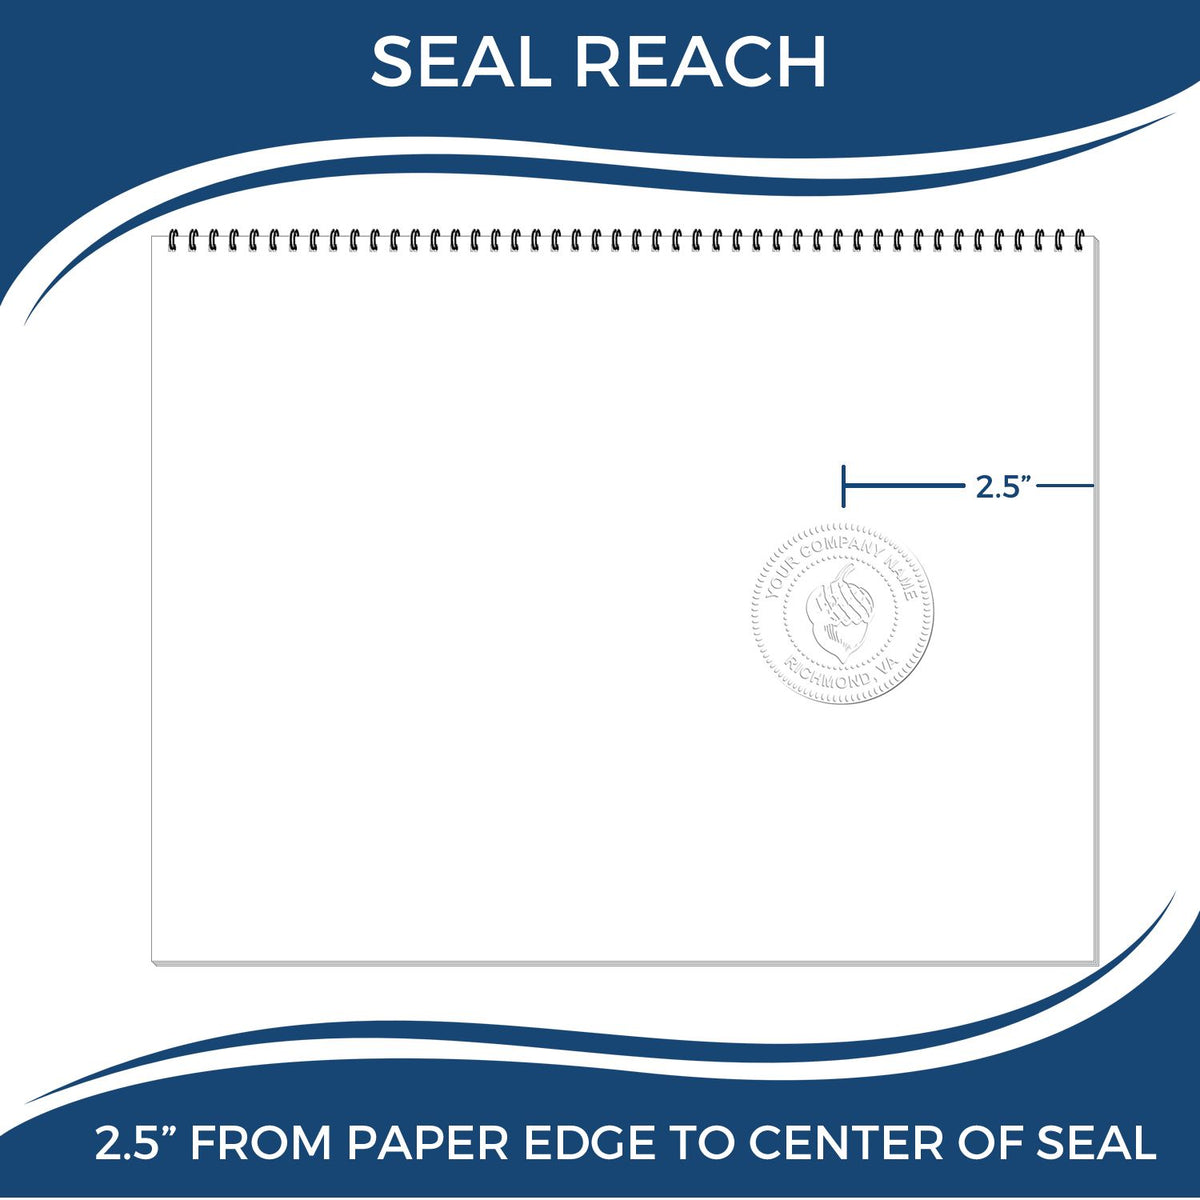 An infographic showing the seal reach which is represented by a ruler and a miniature seal image of the State of Wyoming Long Reach Architectural Embossing Seal